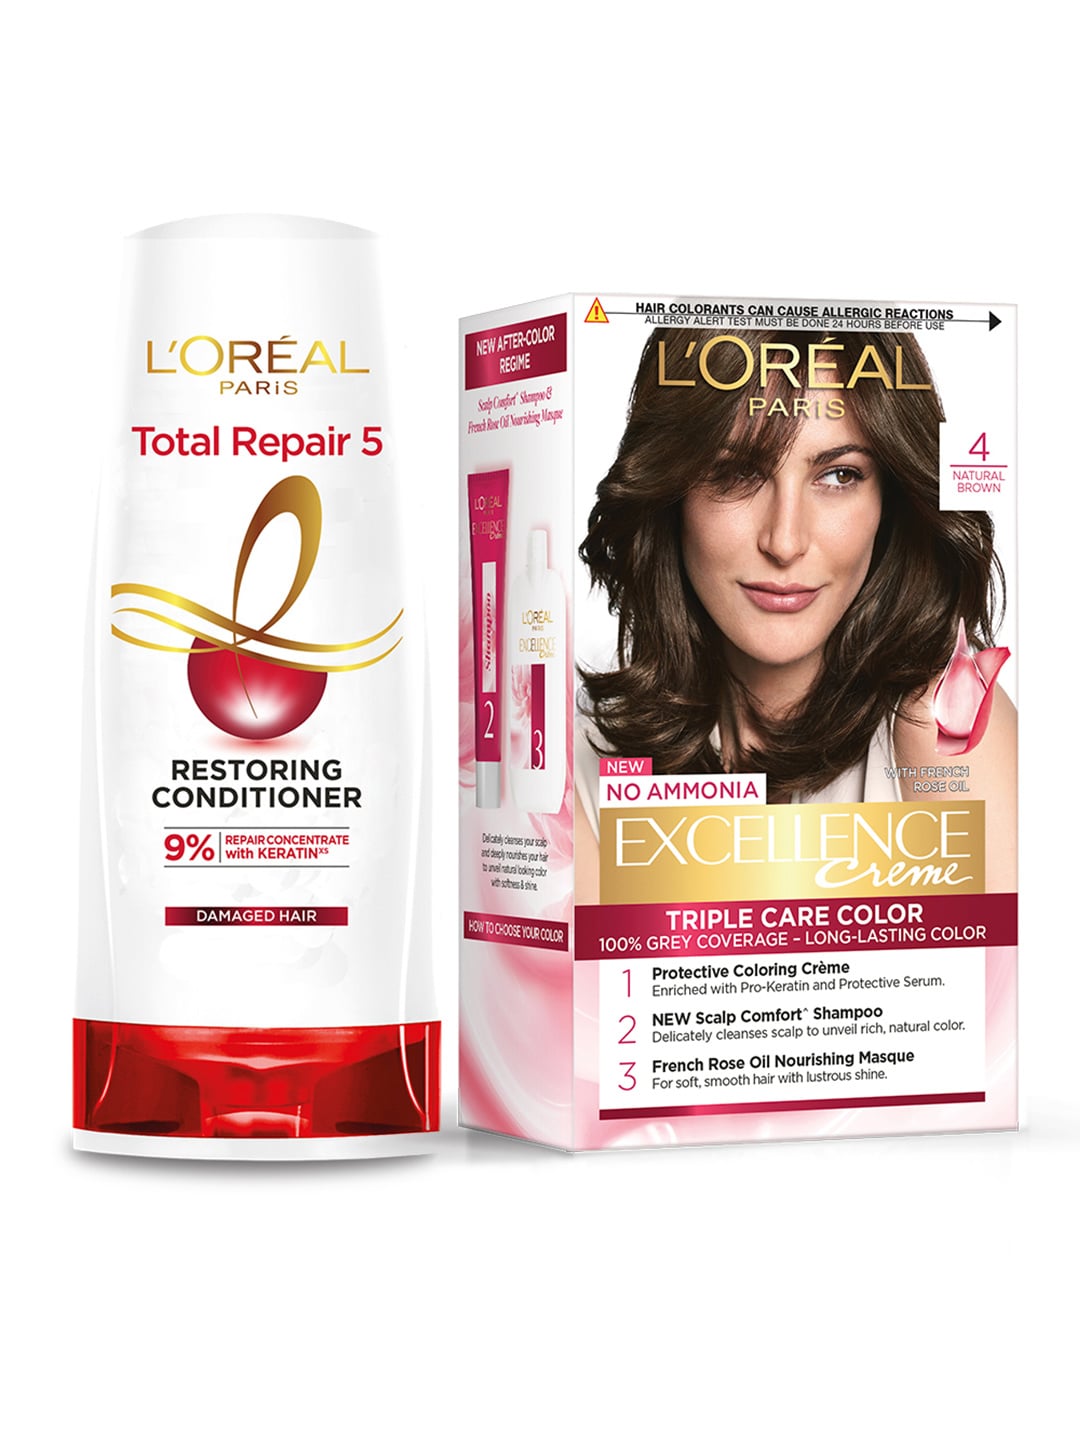 LOreal Paris Set of Total Repair 5 Hair Conditioner & Excellence Creme Hair Color - 04 Price in India